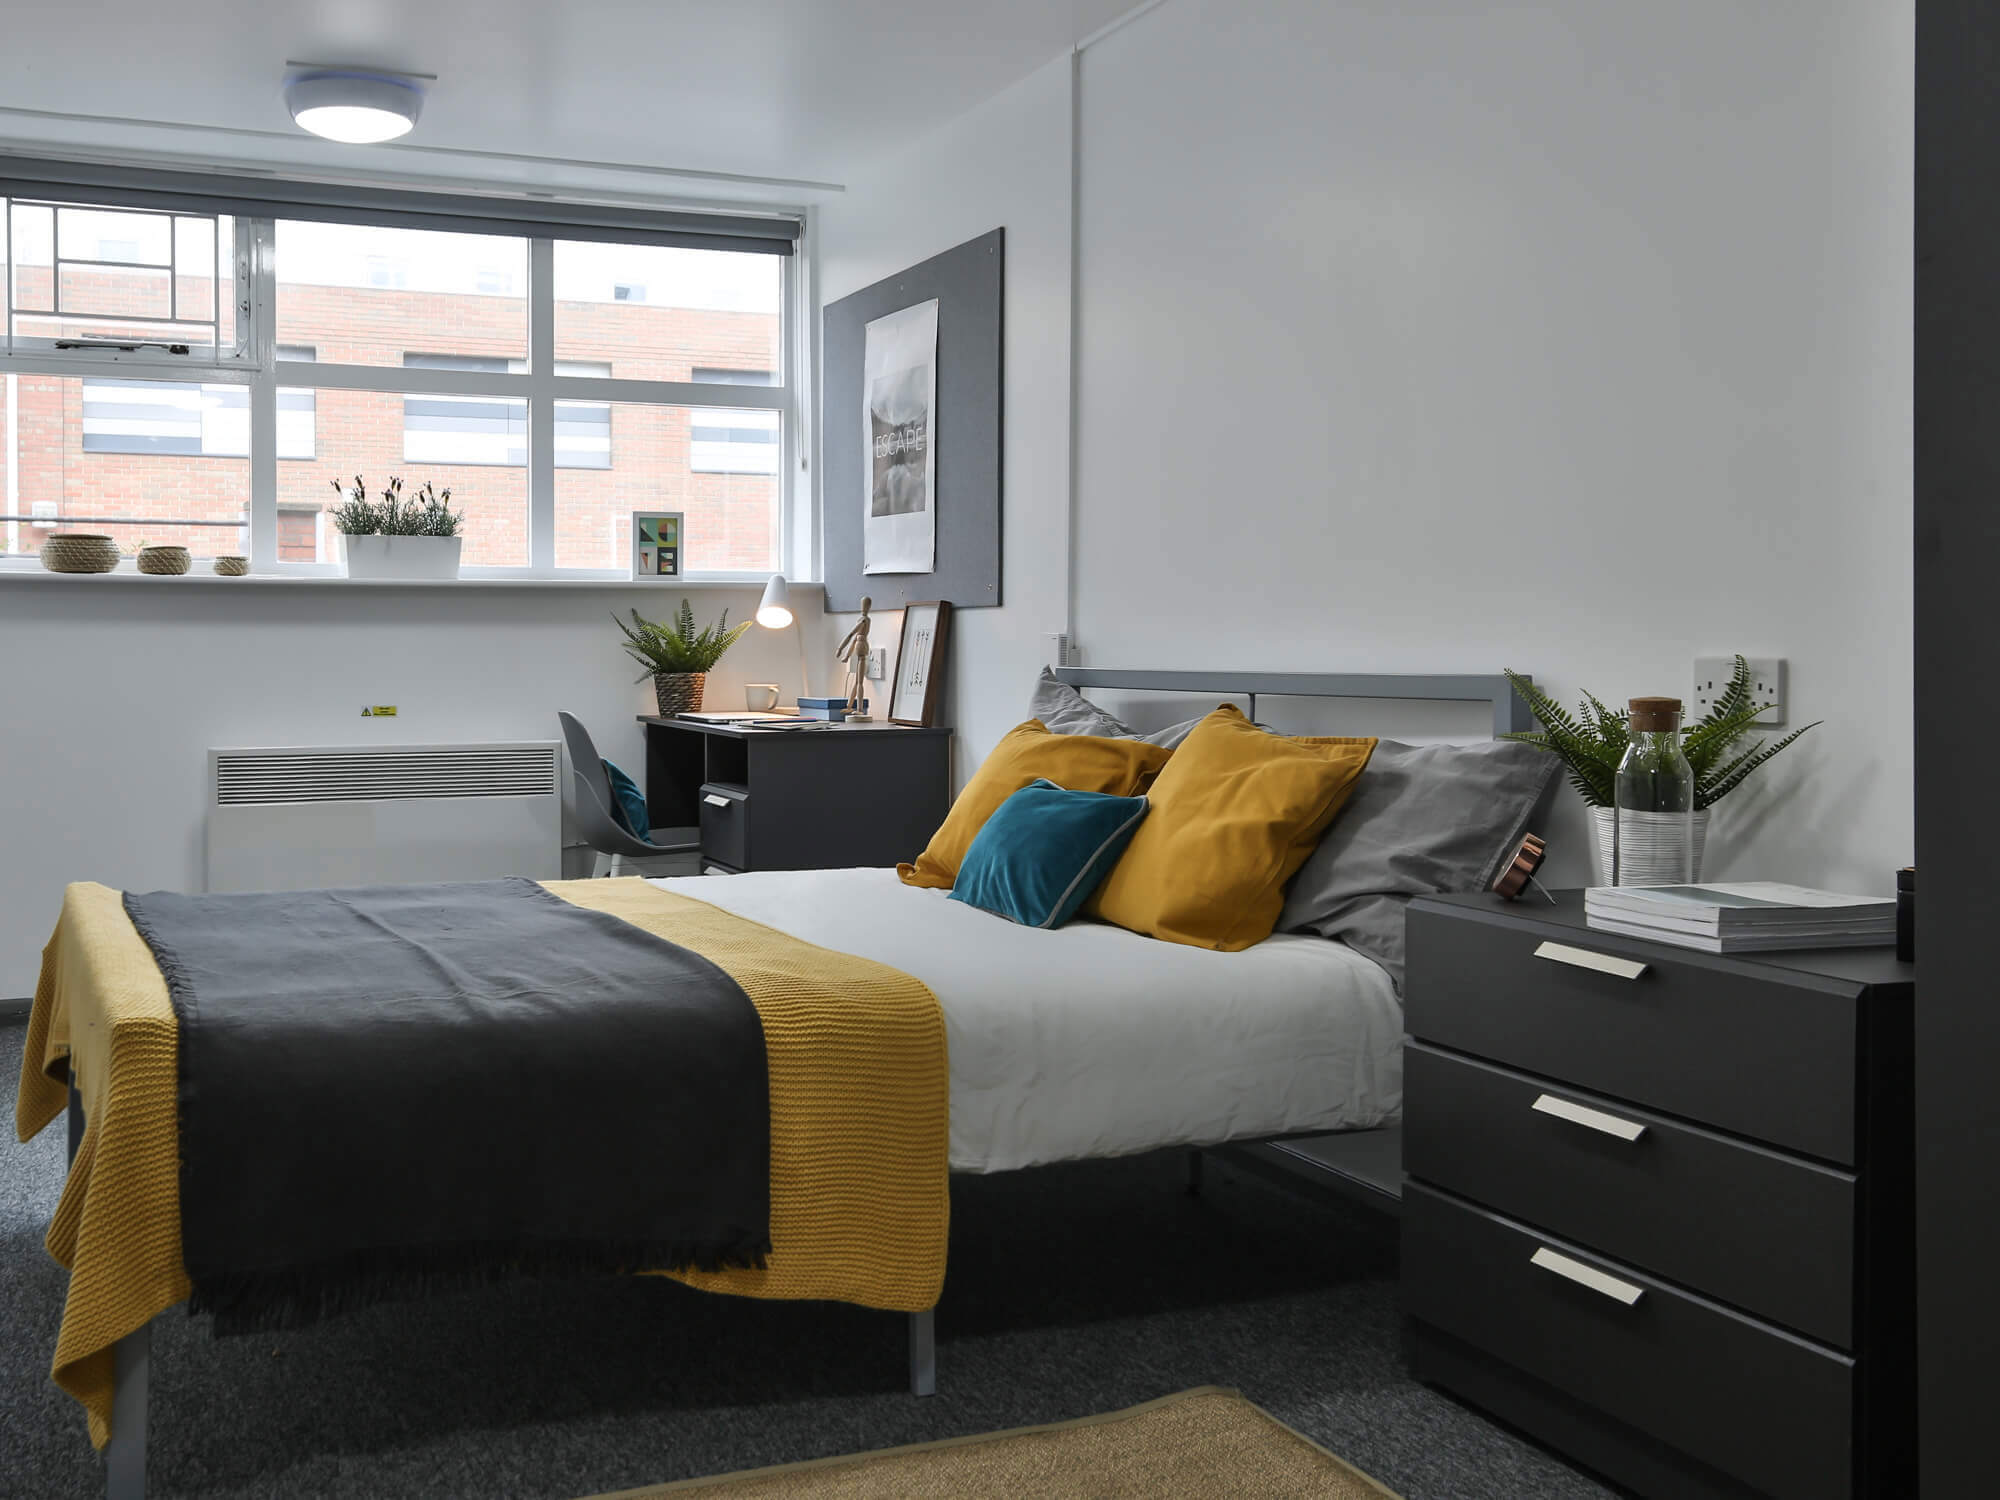 Uni Room Decor: Make Your Student Bedroom Your Own | iQ Student ...